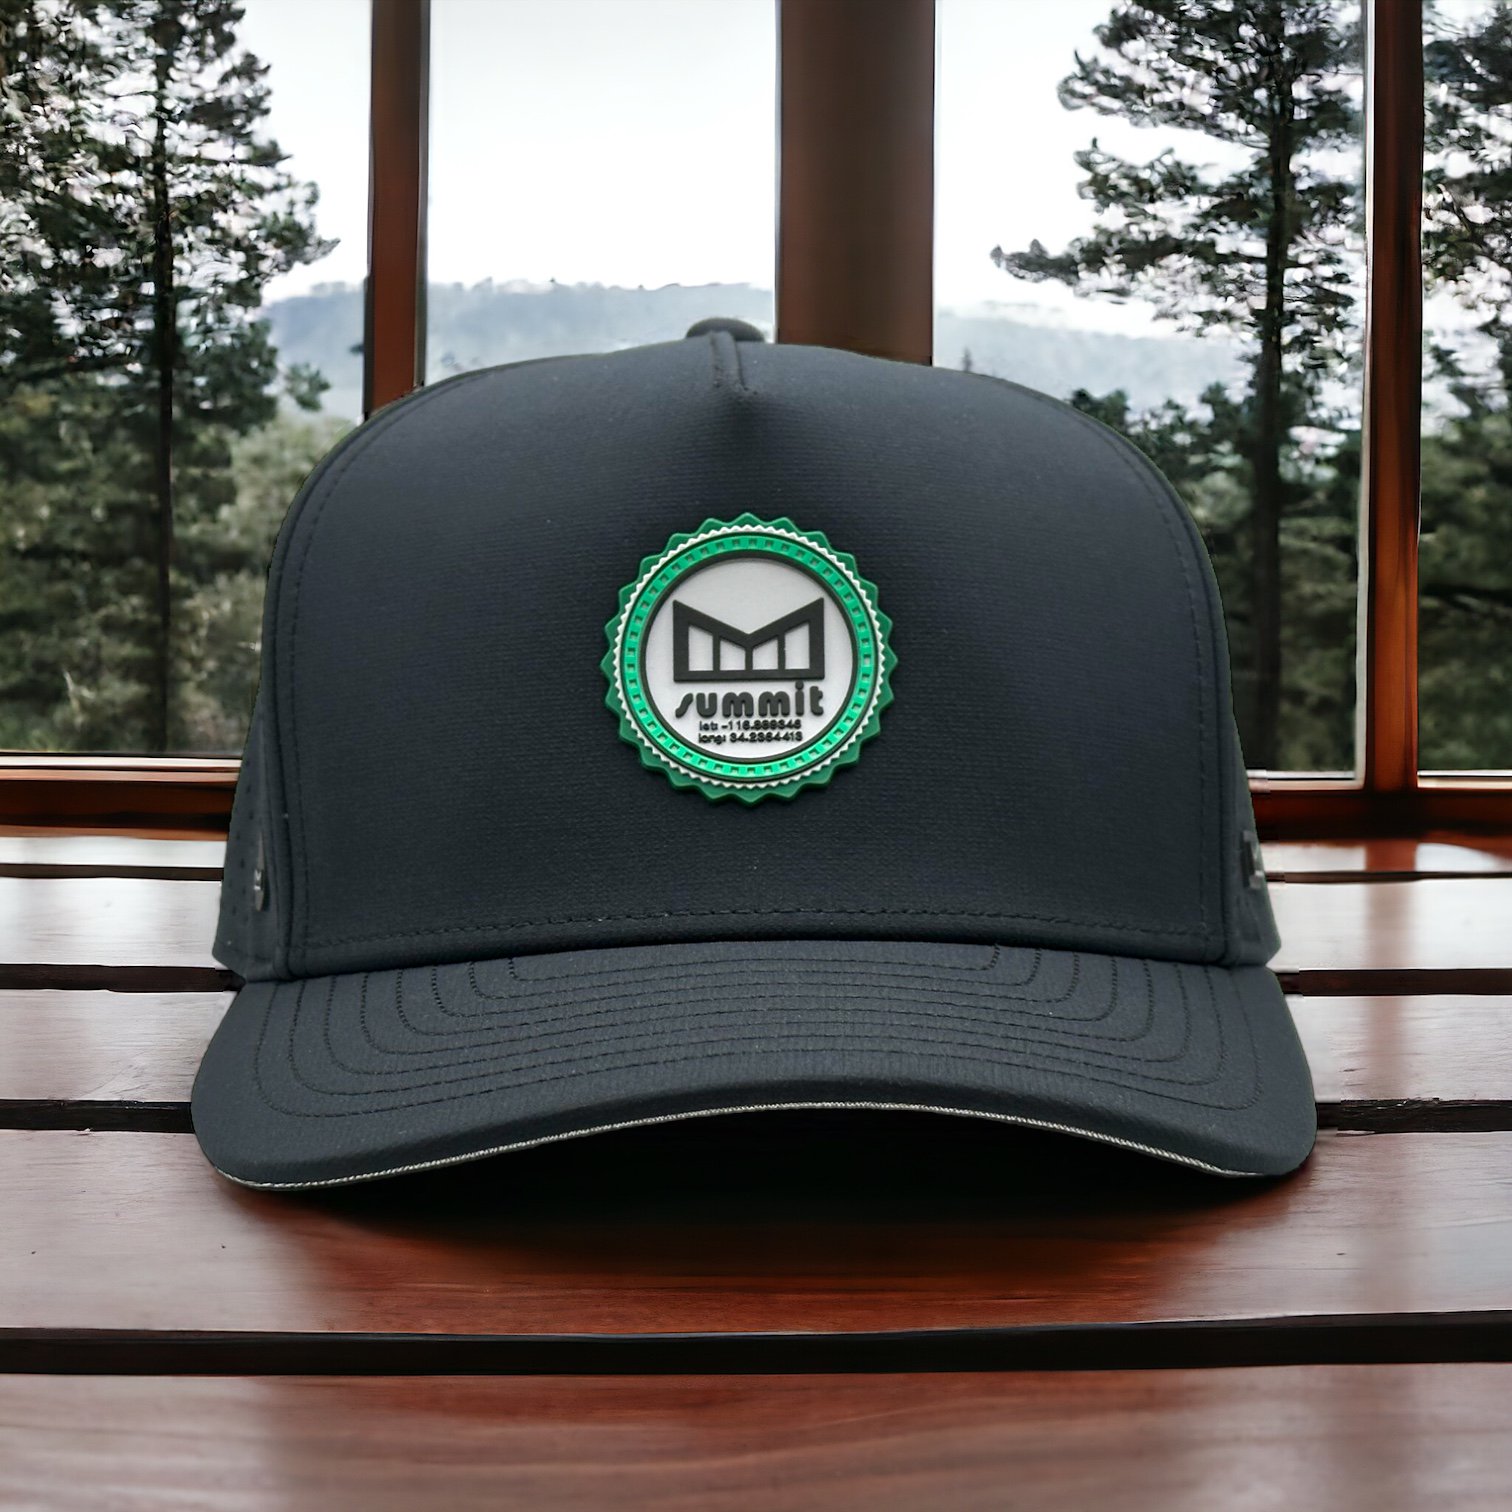 Black Melin and Snow Summit collaboration curved bill hat with circle Summit logo on front